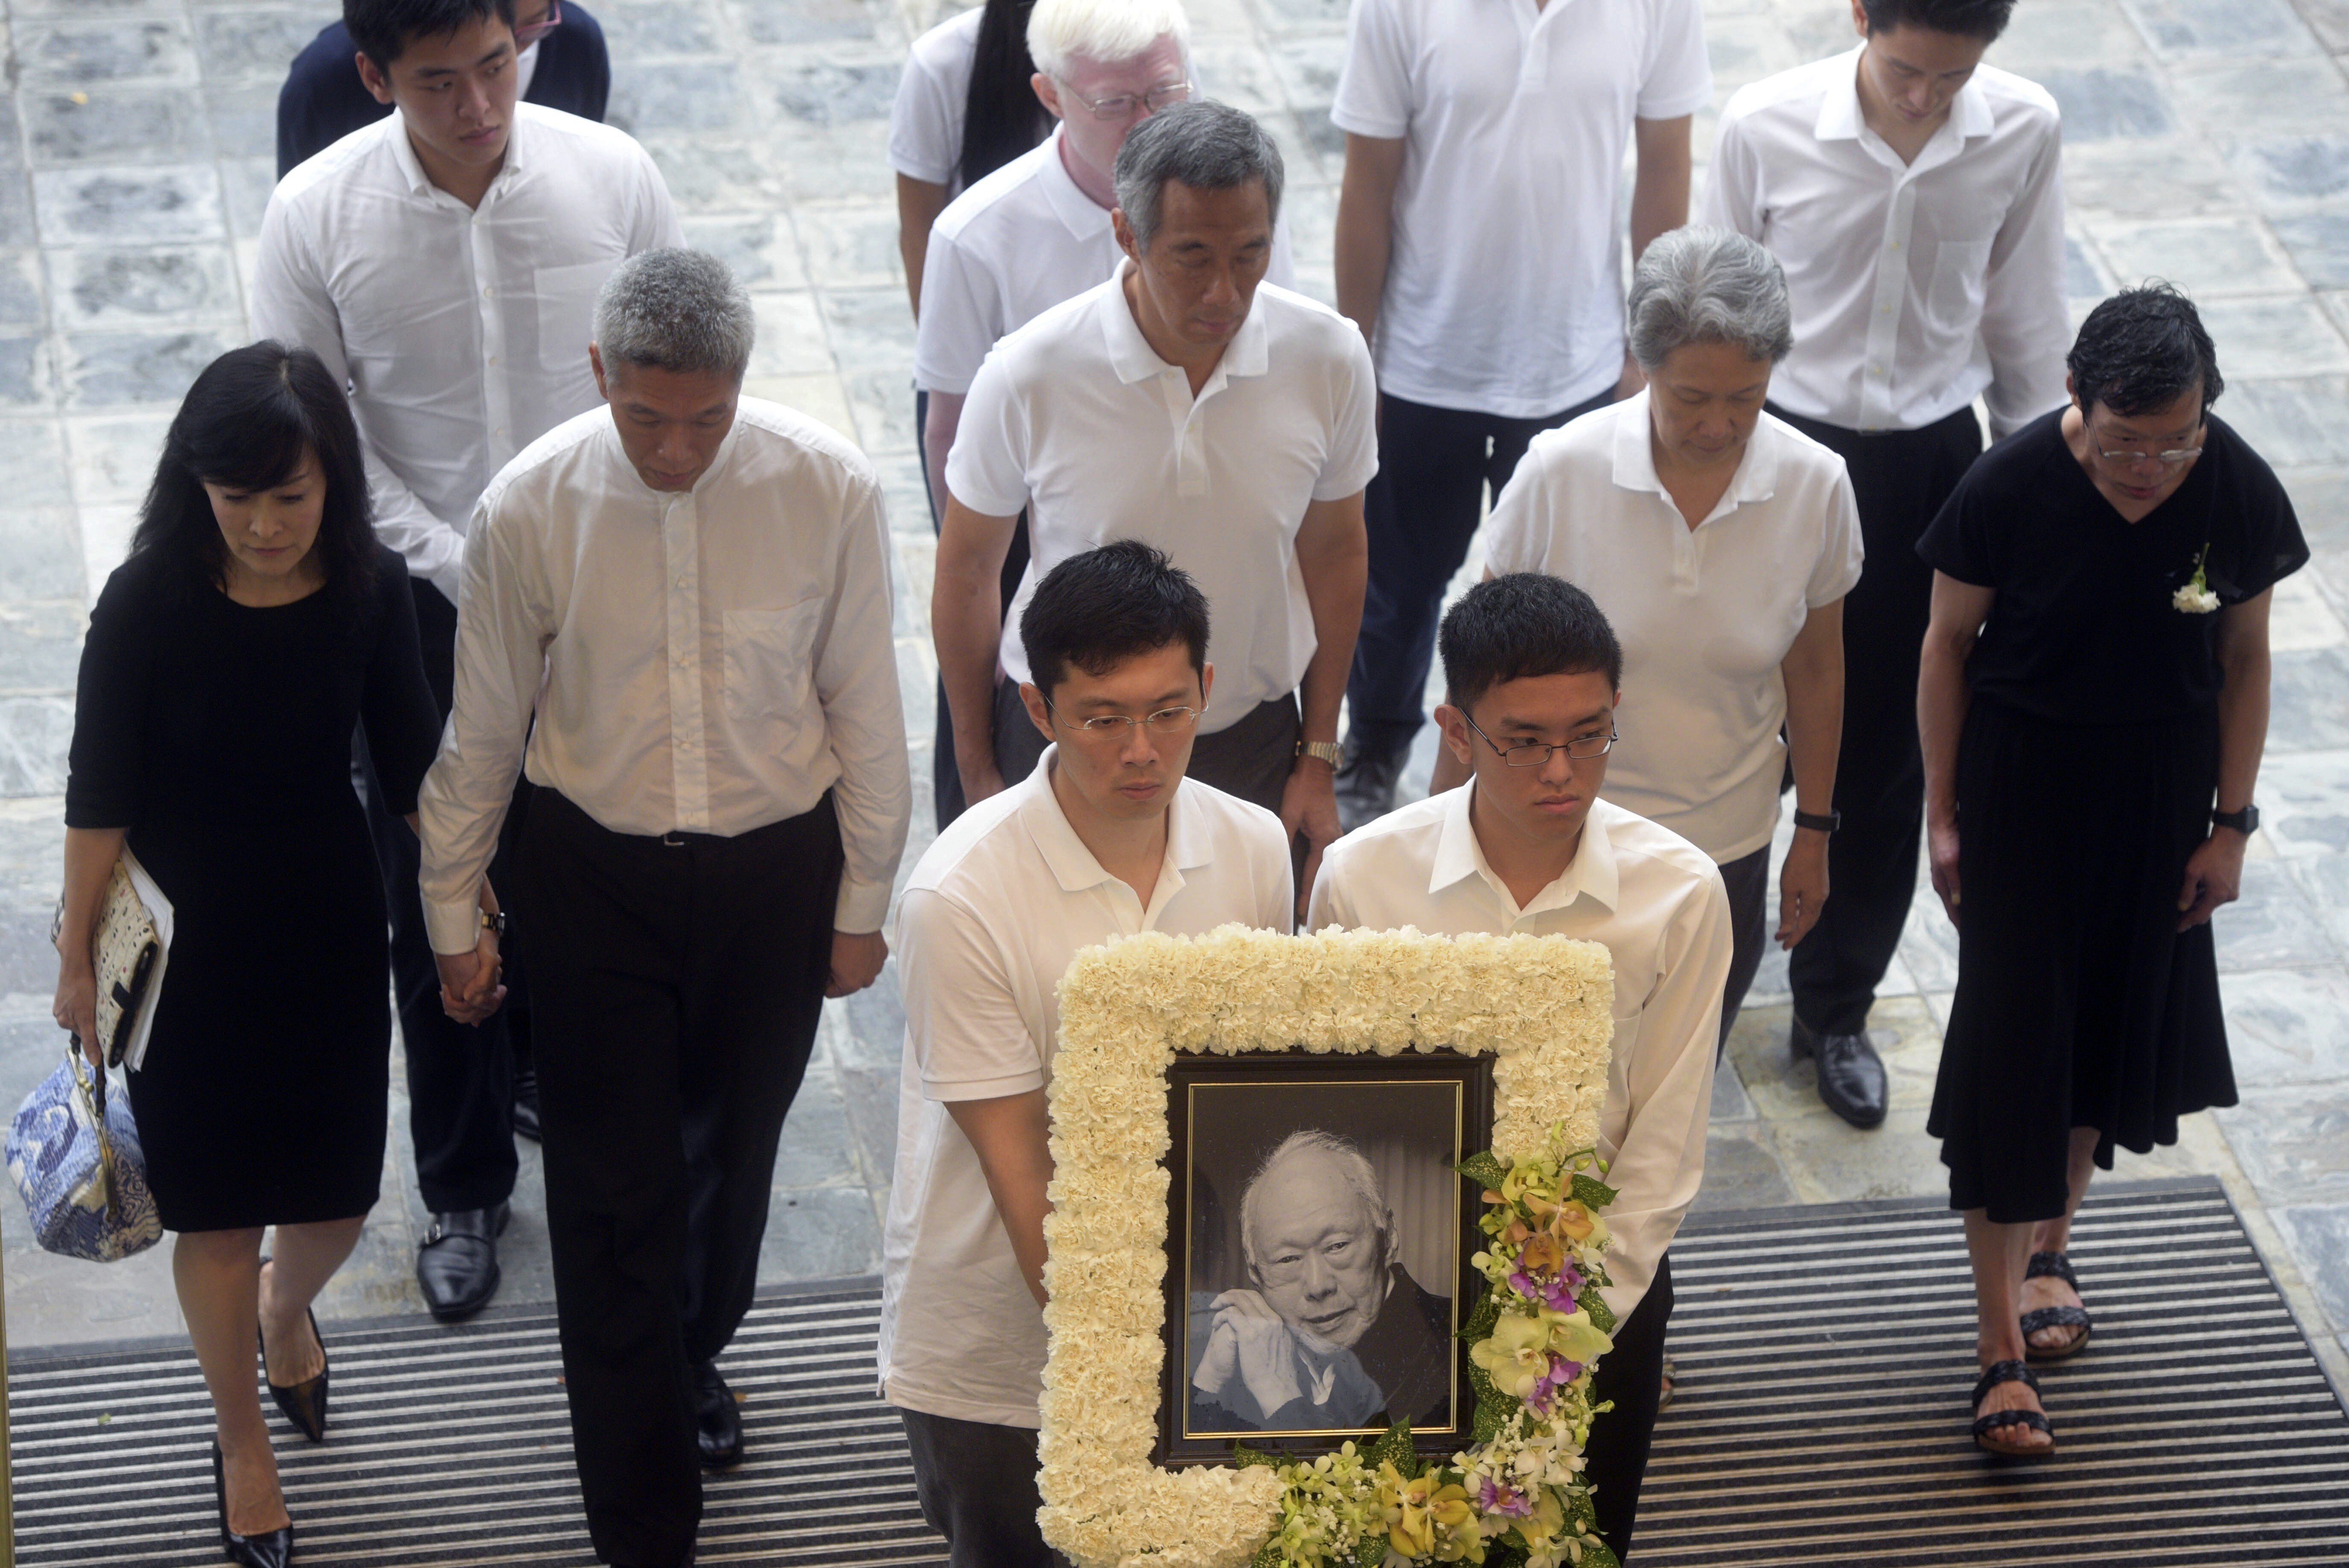 Lee Suet Fern (far left) and other family members of the late Lee Kuan Yew arrive with his portrait at the start of the state funeral at the University Cultural Centre in Singapore on March 29, 2015. Photo: AP